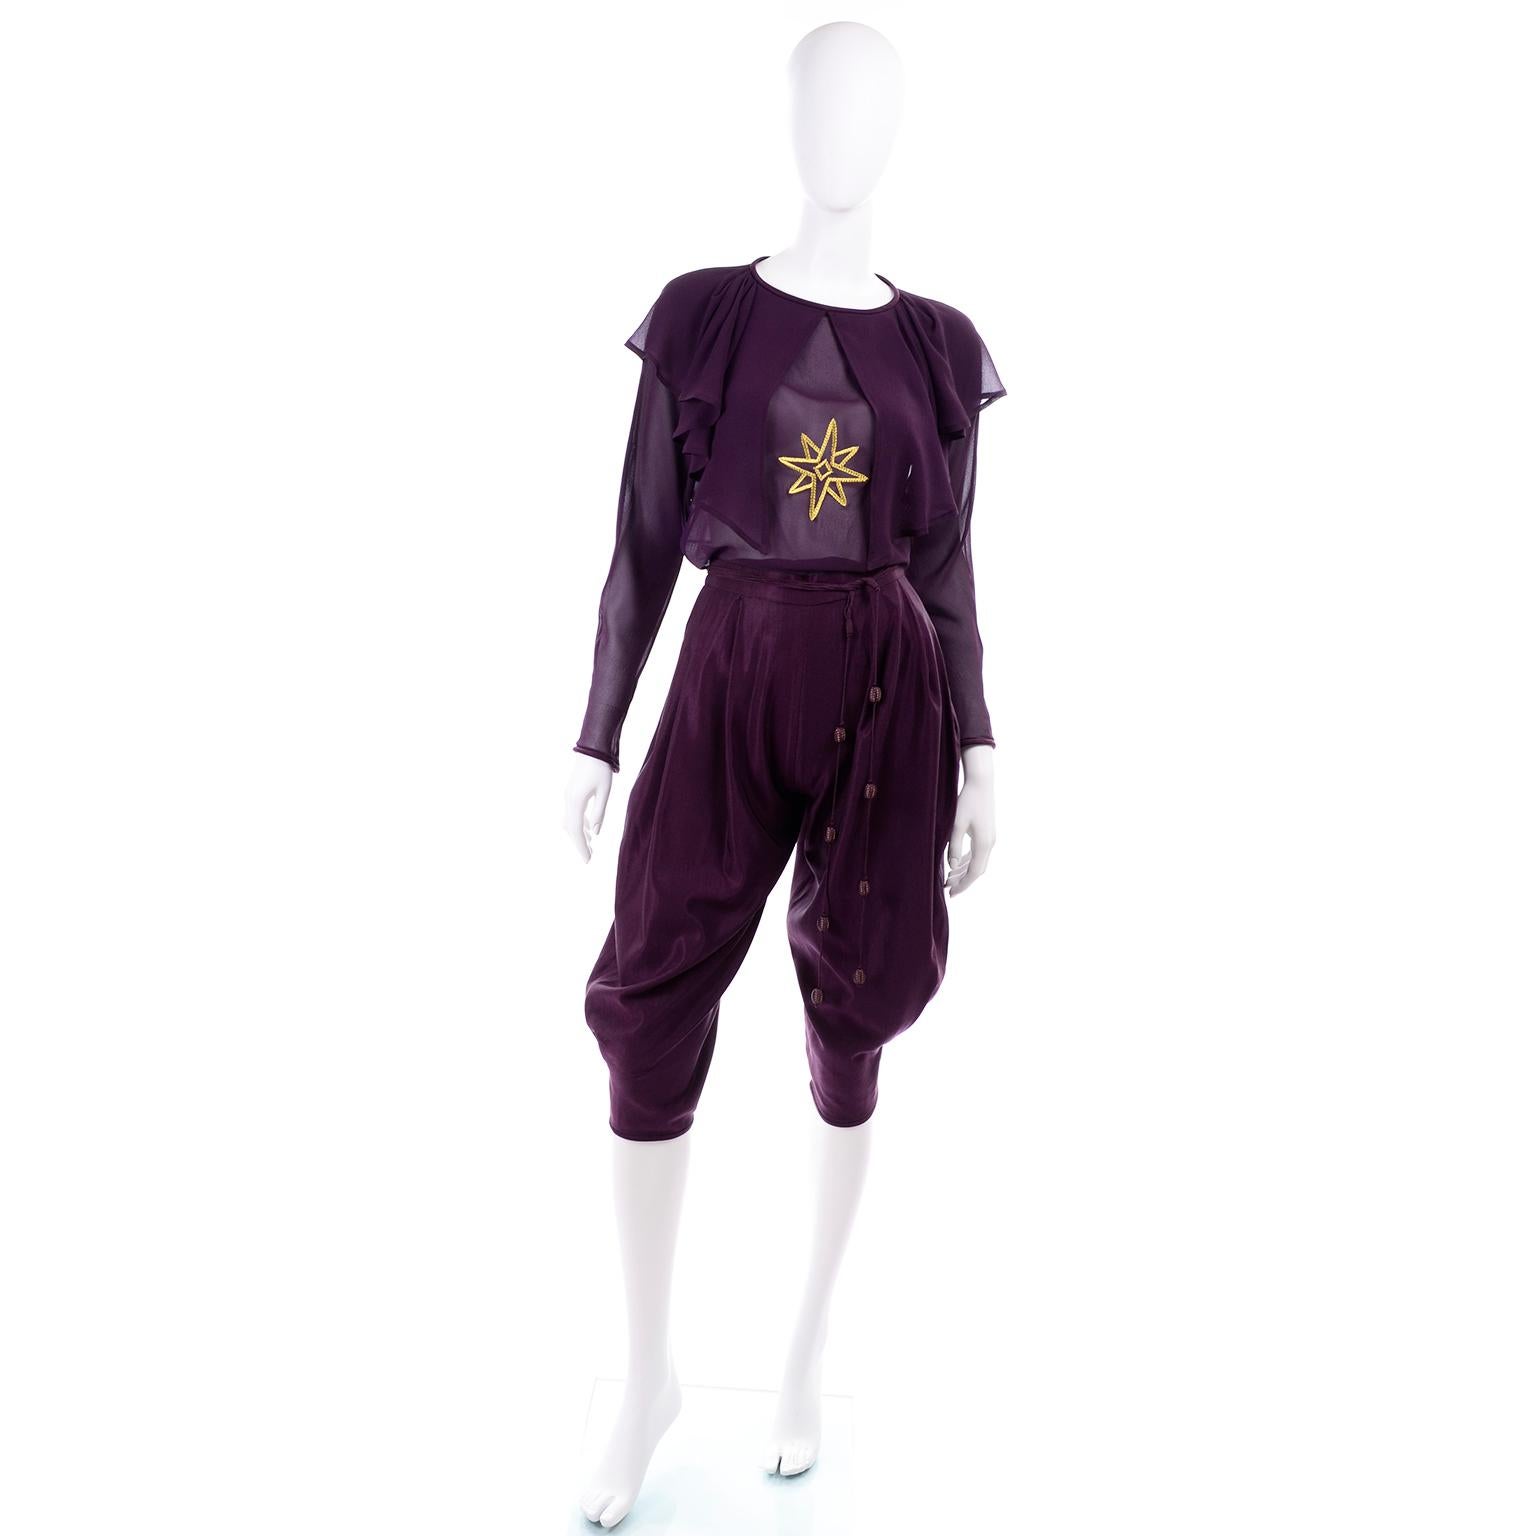 This is a rare vintage Gianni Versace 2 piece deep plum purple outfit from Fall/Winter 1981 that includes a pair of high waist knee length jodhpur style pants or knickers, and a beautiful silk chiffon blouse with a gold star embroidered on the